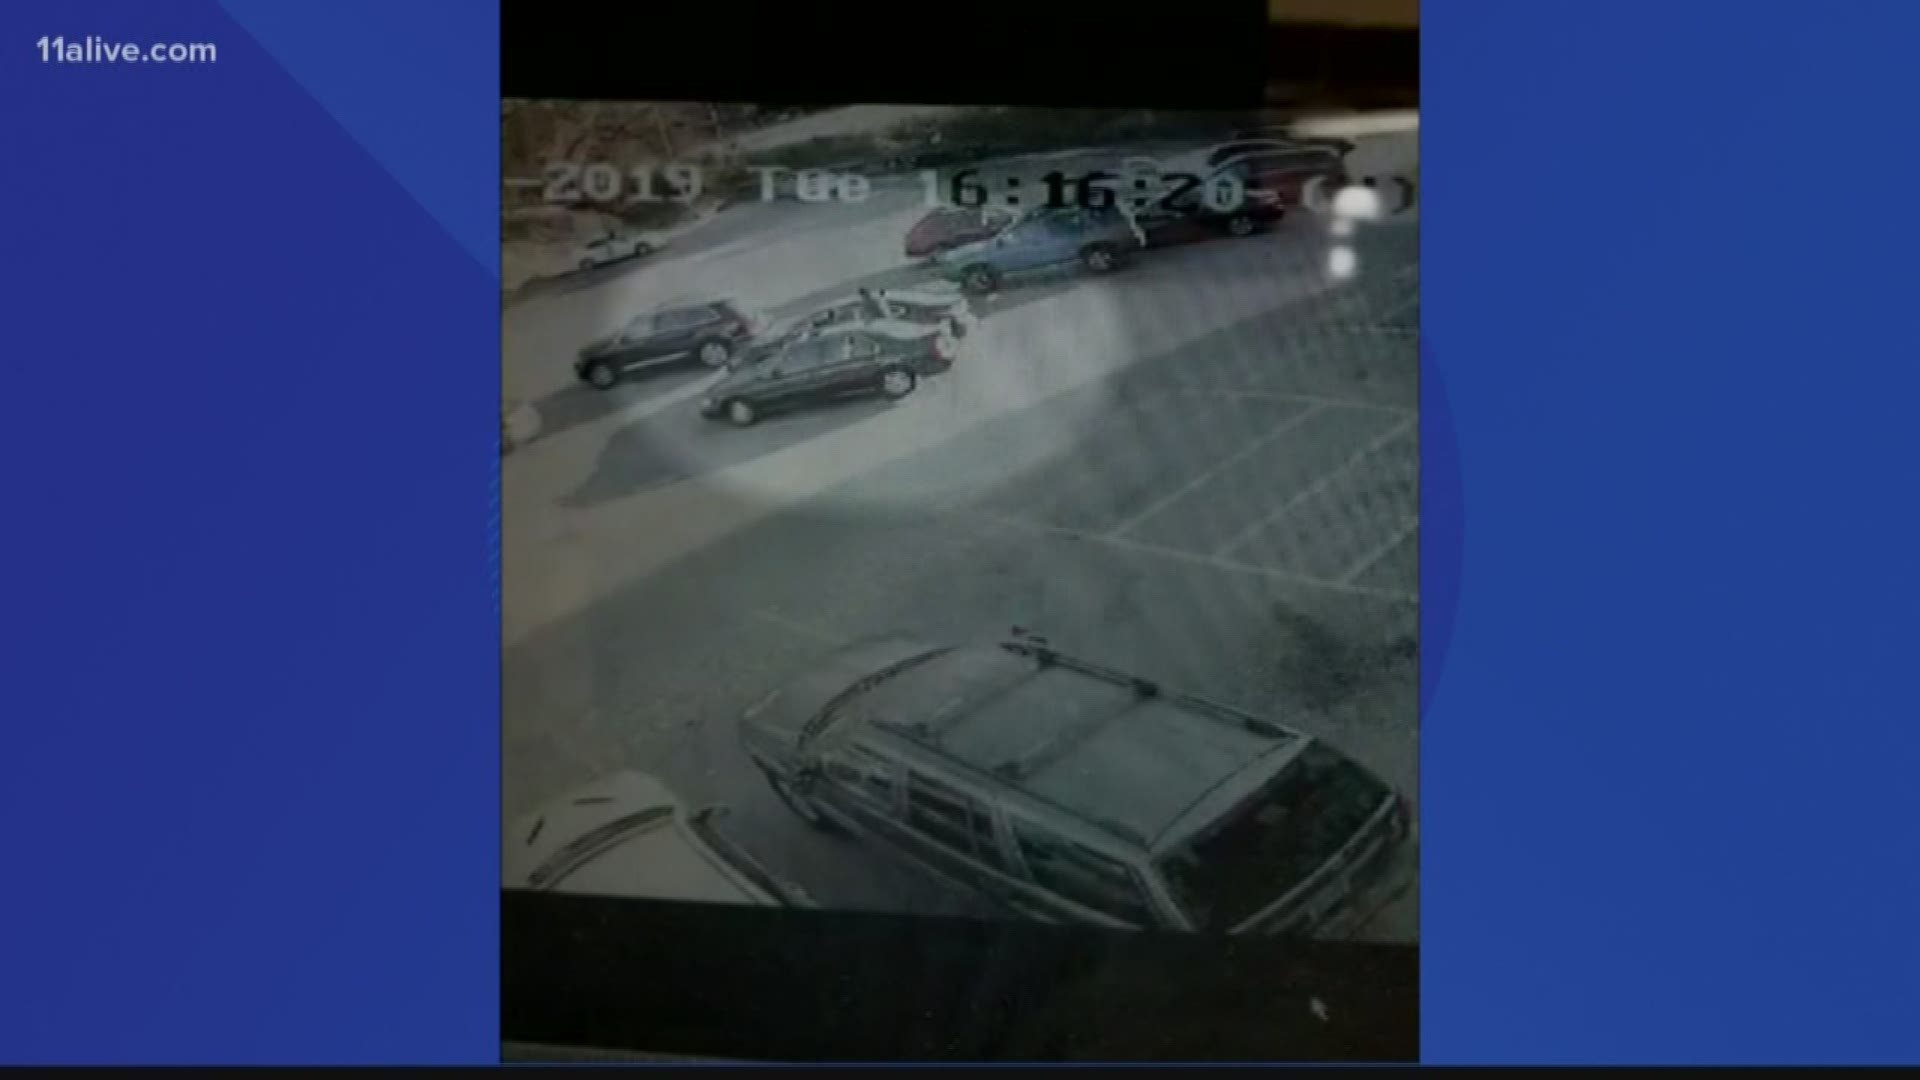 Atlanta Police need help identifying suspects in a video. They are also looking for a stolen car used to commit the crimes.